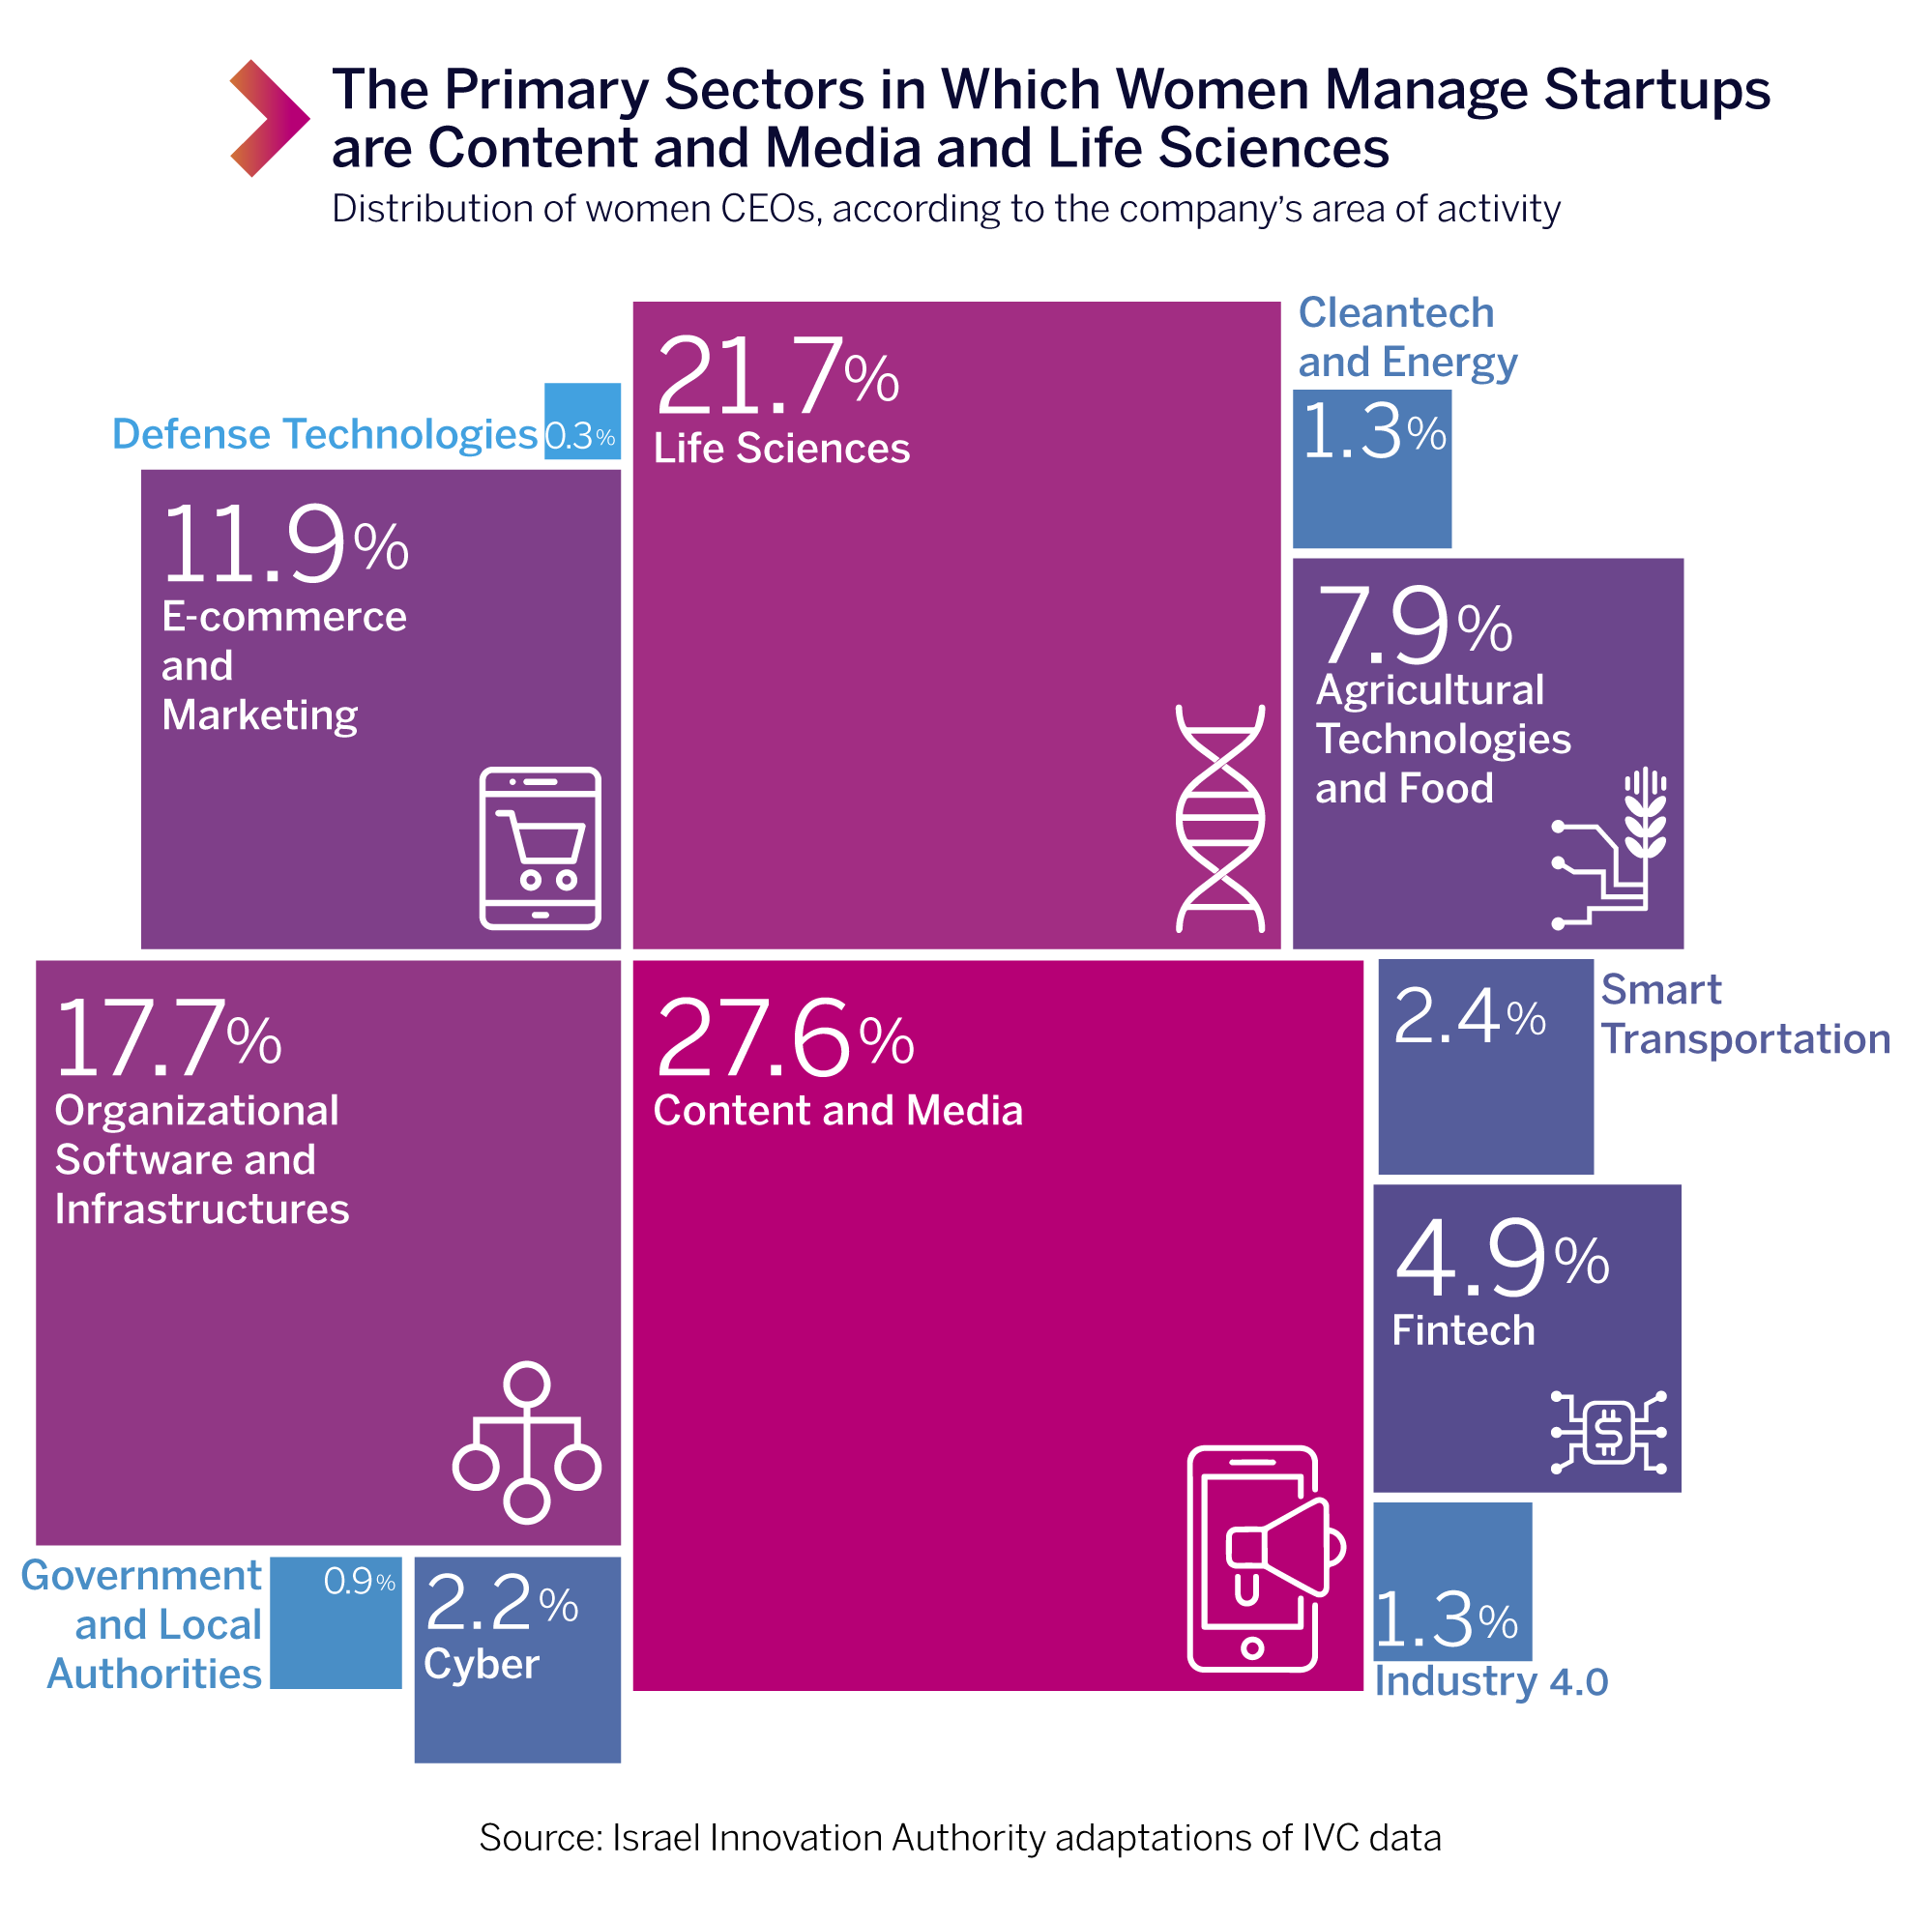 The Primary Sectors in Which Women Manage Startups are Content and Media and Life Sciences